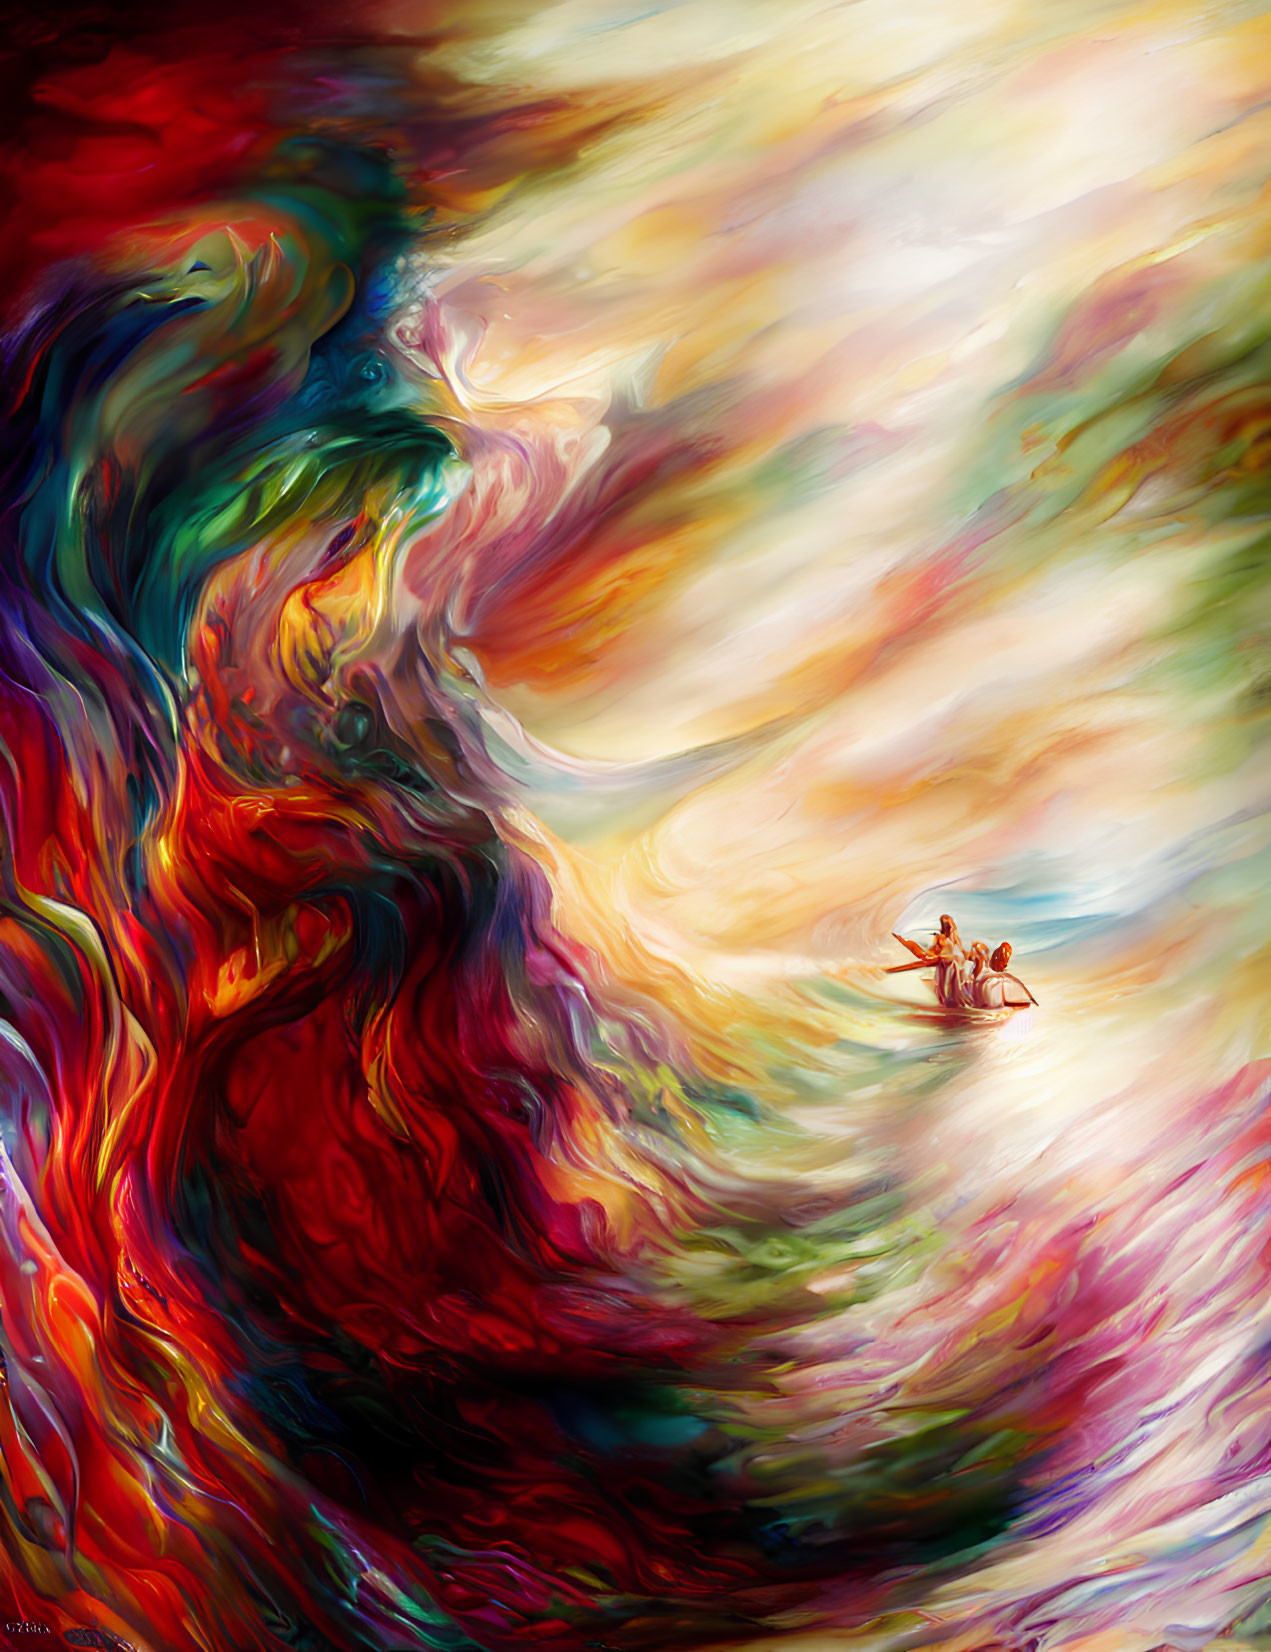 Colorful Abstract Art: Cosmic Storm with Rowboat Silhouette